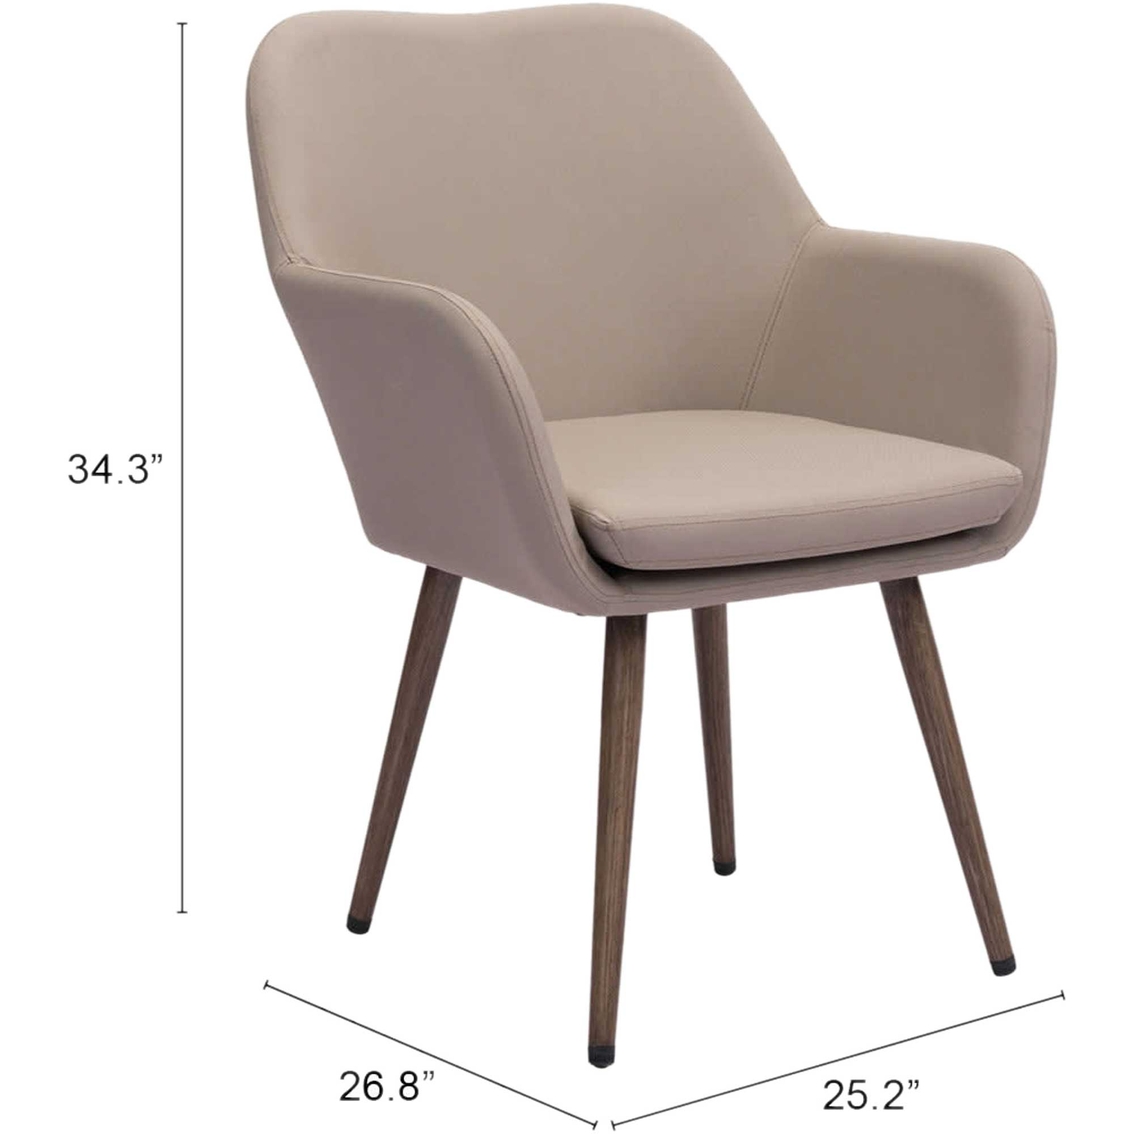 Zuo Modern Pismo Dining Chair - Image 6 of 7